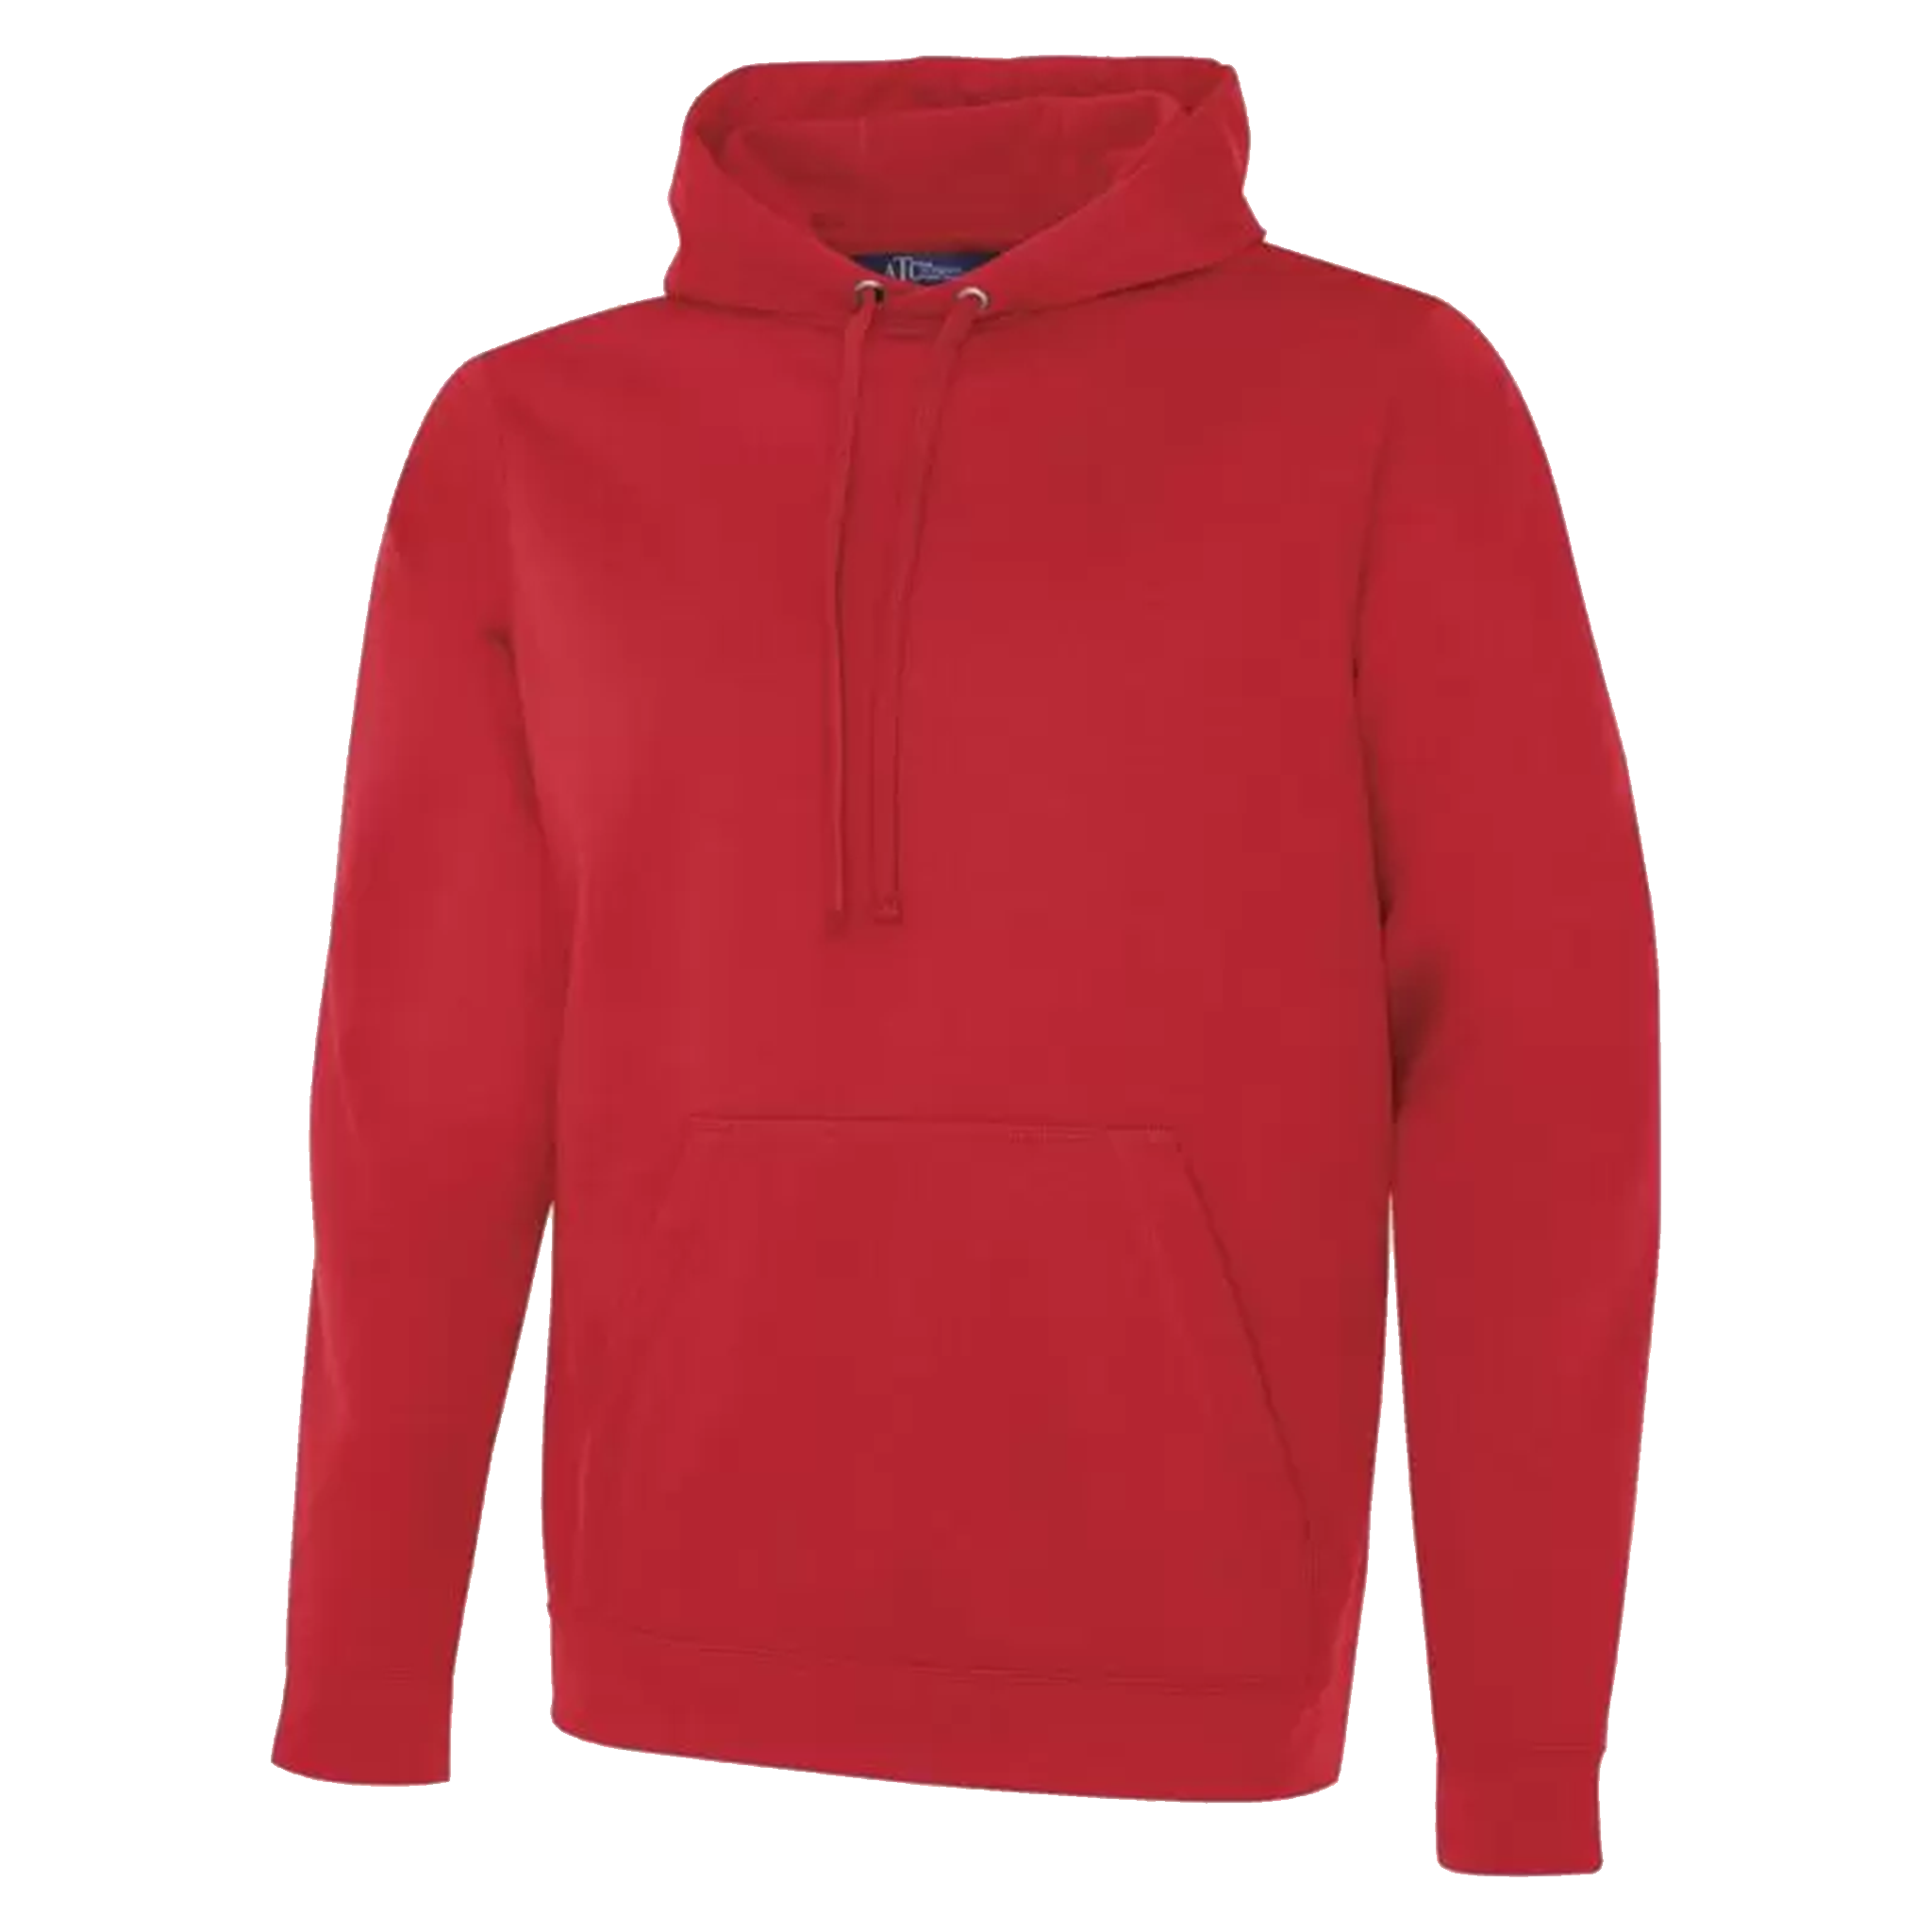 ATC Game Day Fleece Hoodie - Adult Unisex Sizing XS-4XL - Red